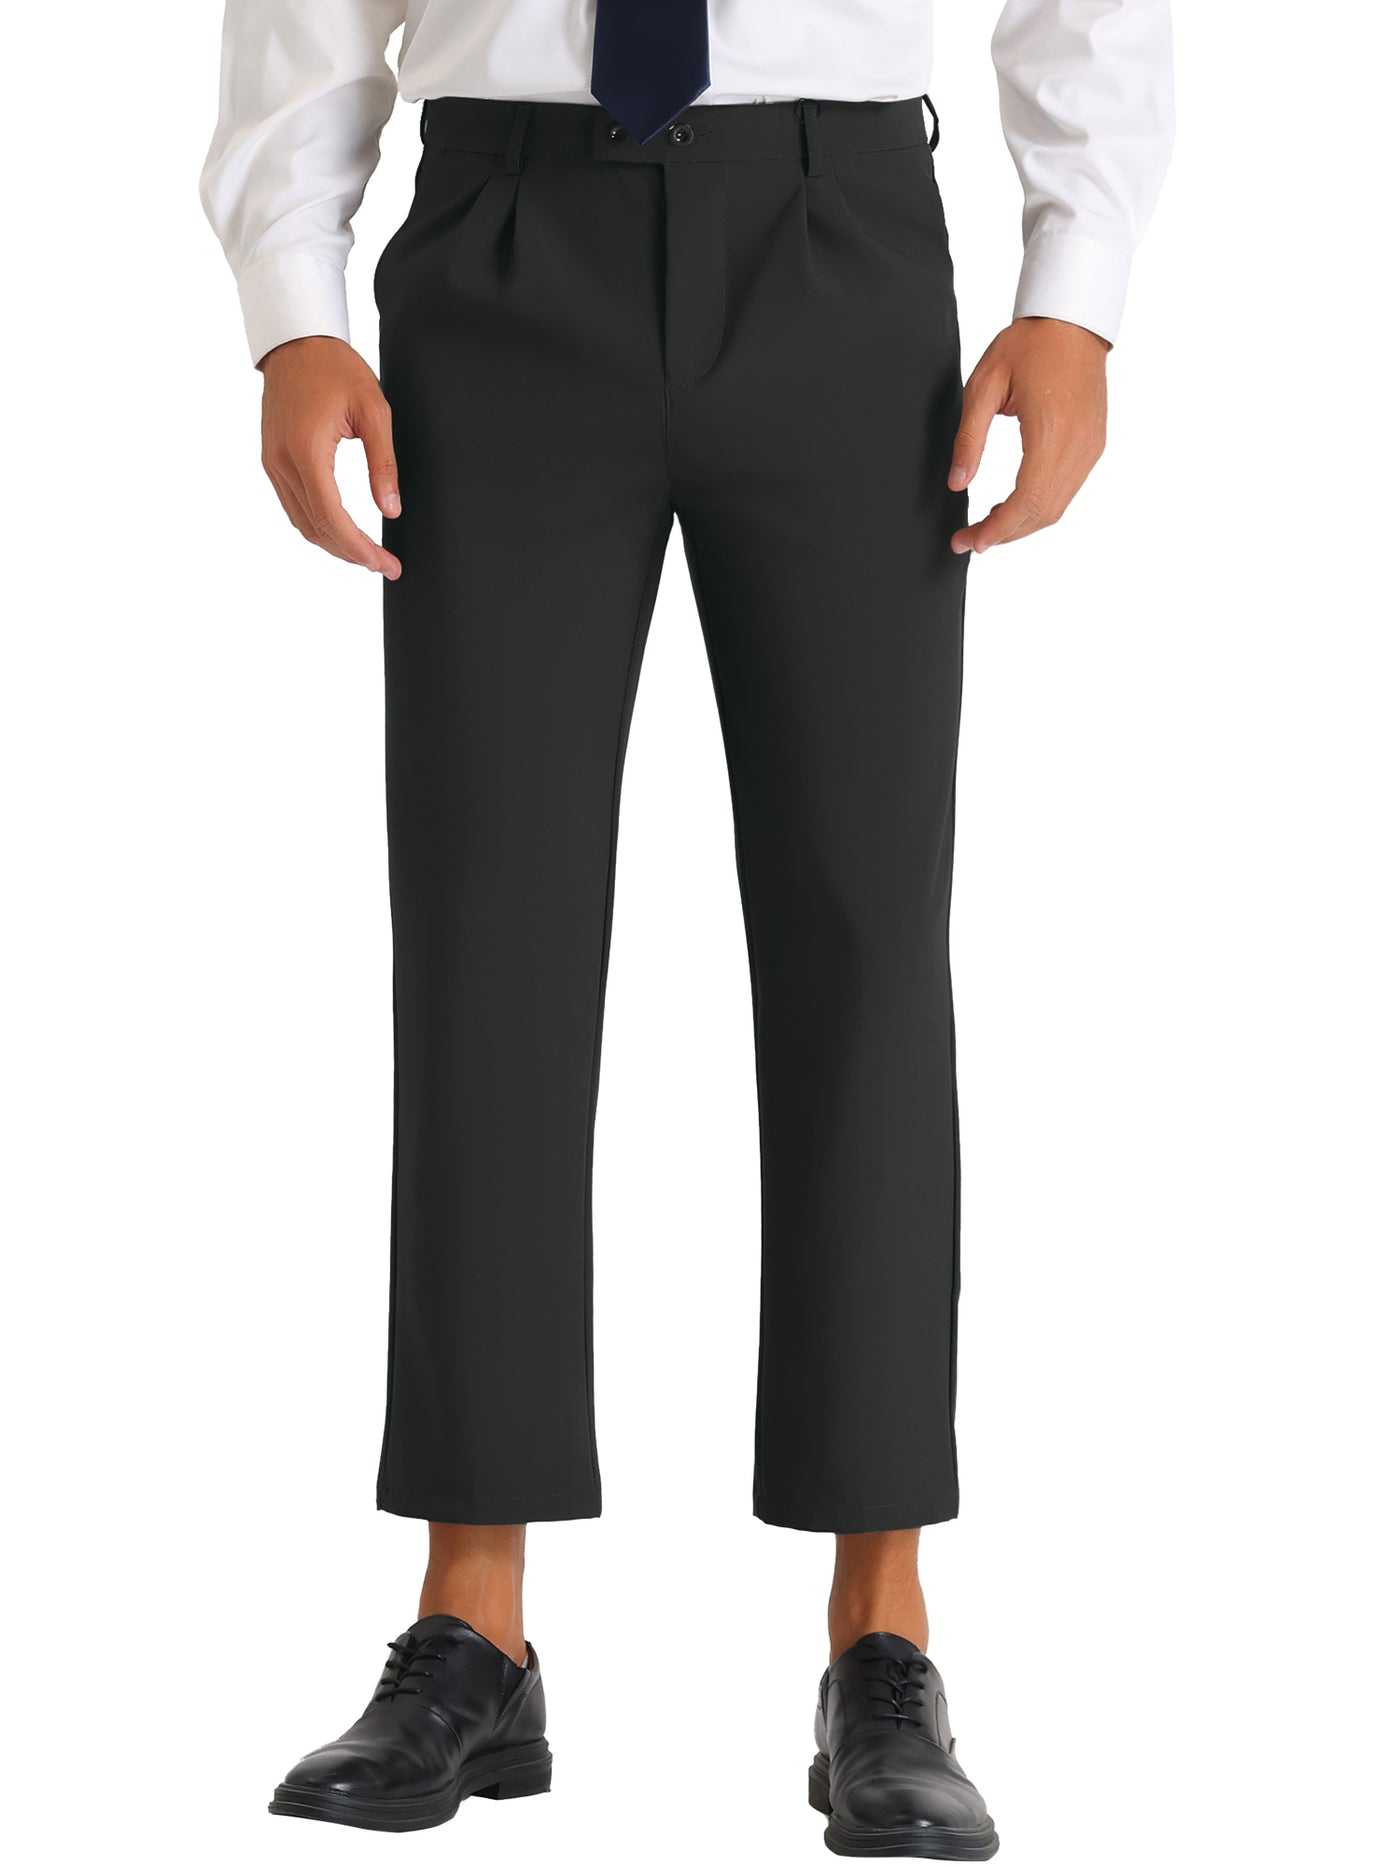 Bublédon Men's Two Buttons Pleated Front Tapered Work Office Dress Pants